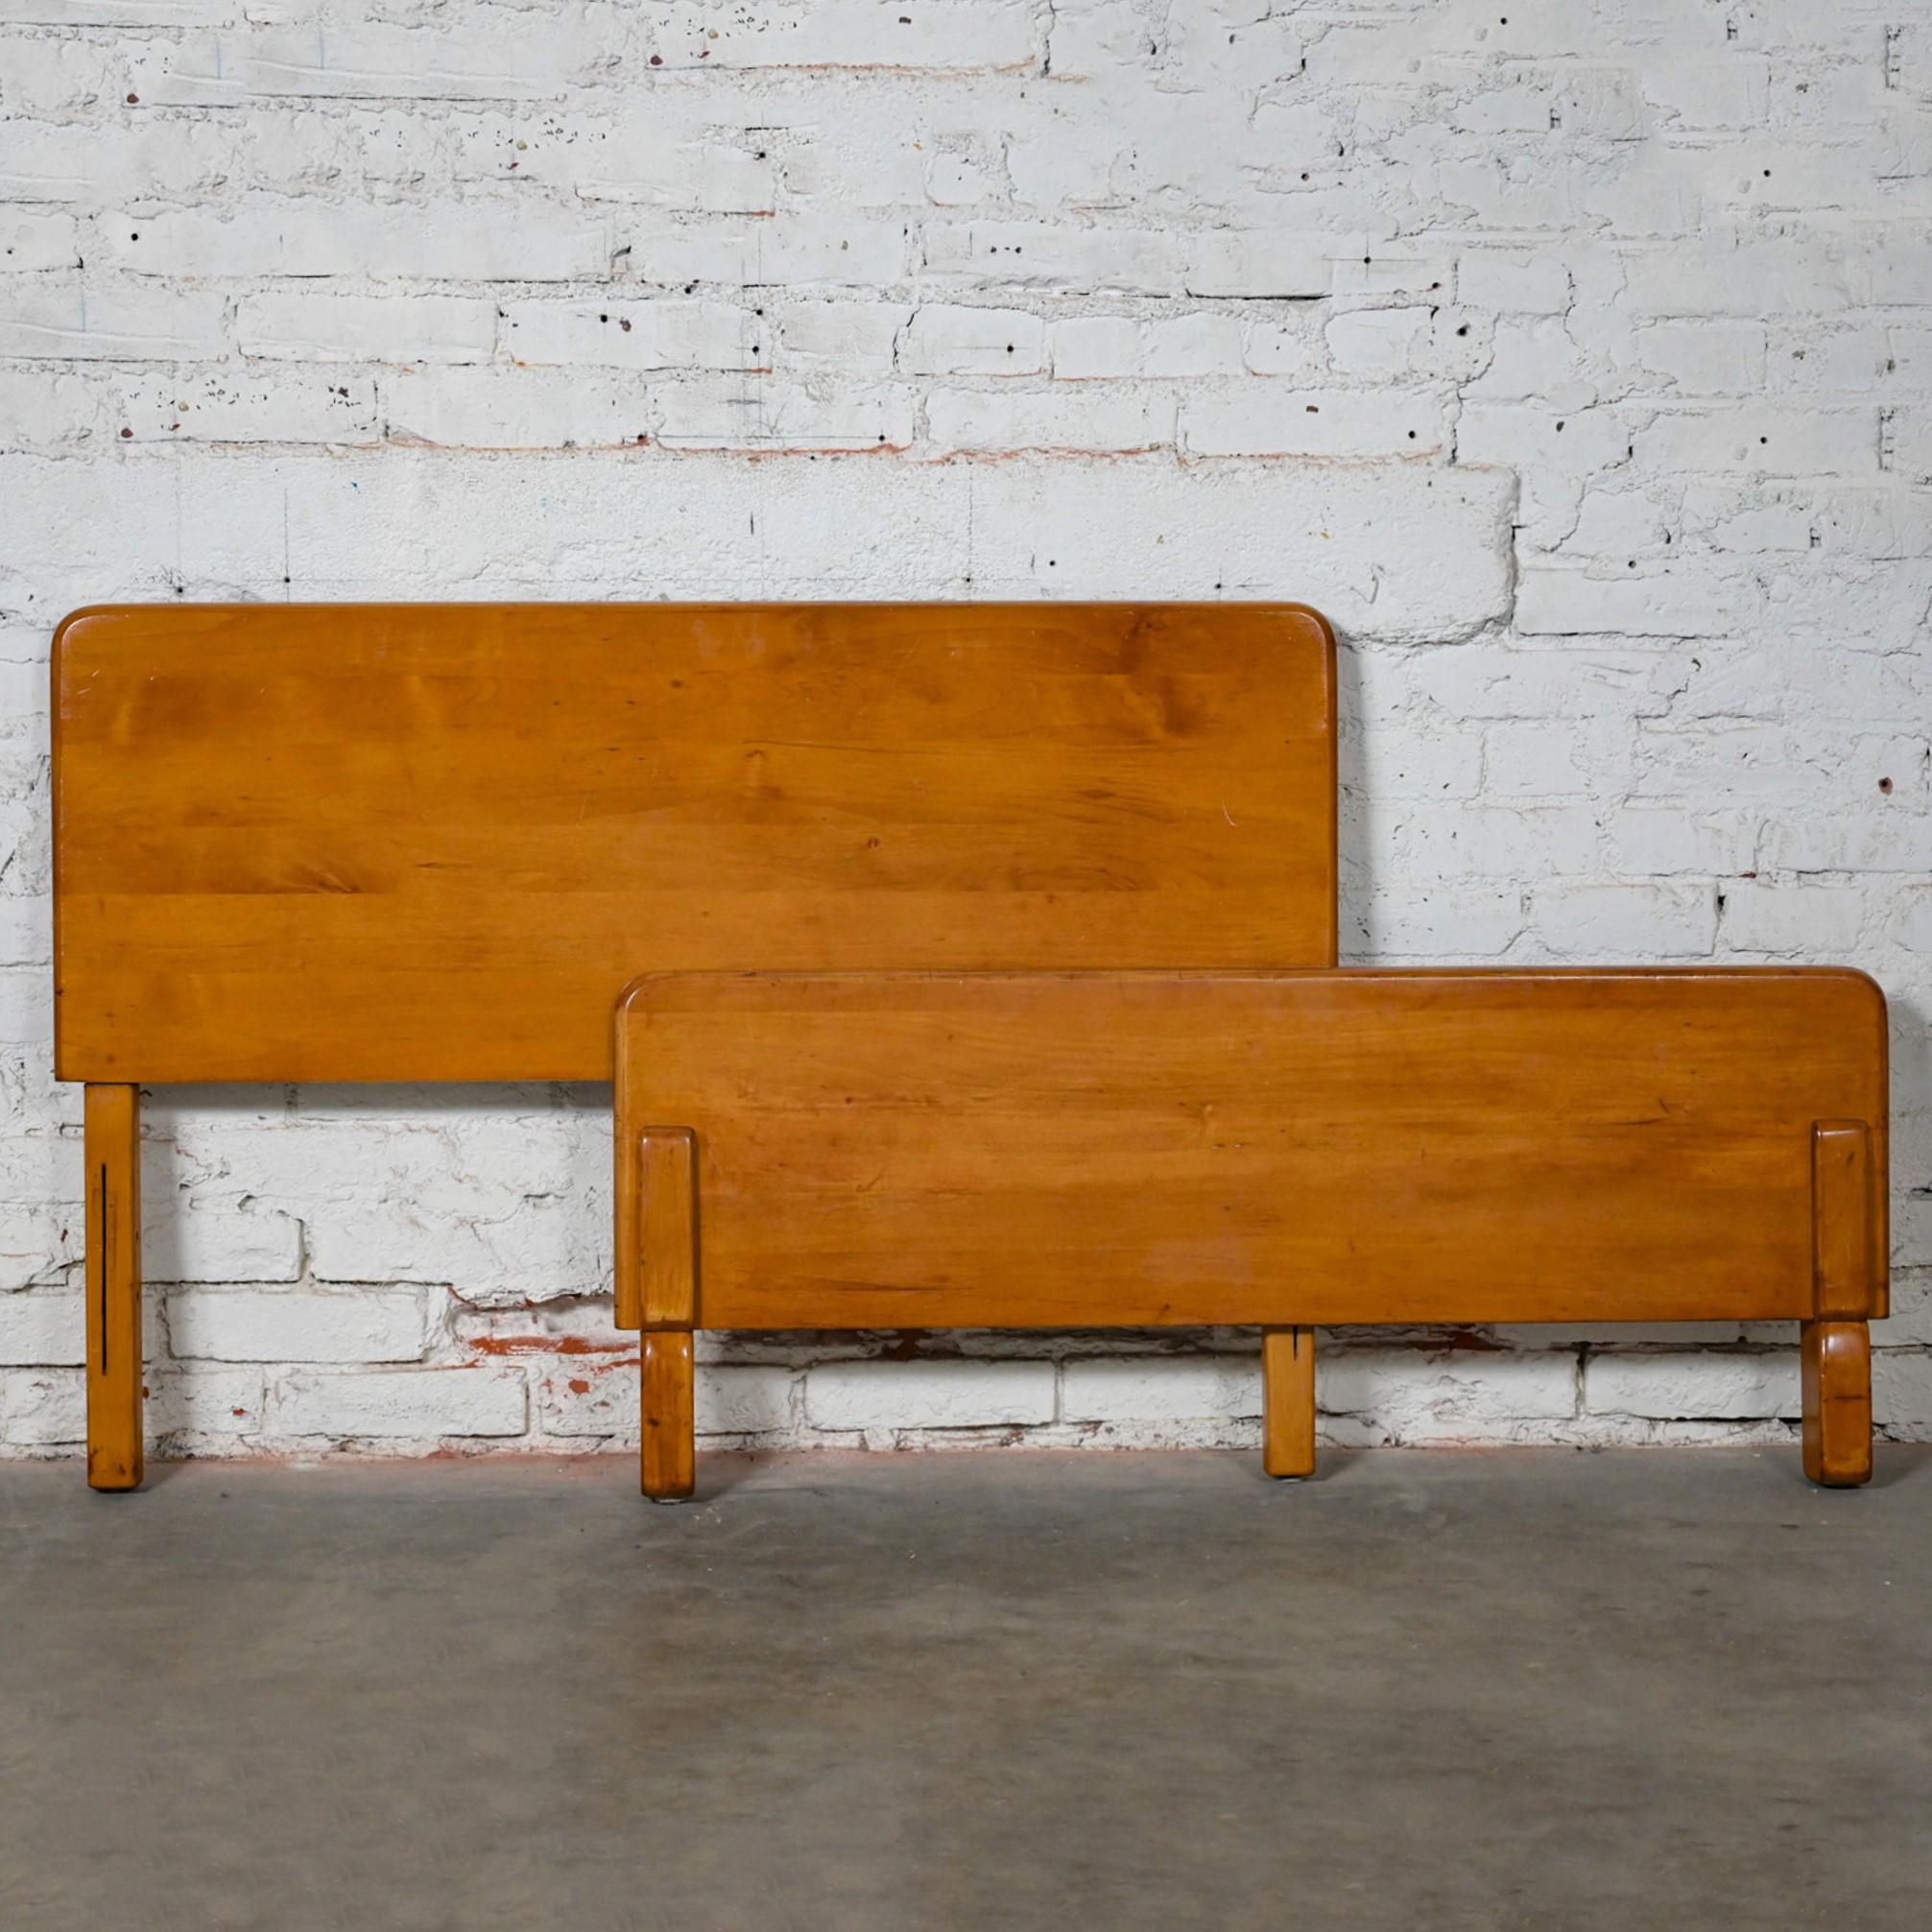 Early-Mid-20th Century Art Moderne Maple Twin Bed Headboard & Footboard  For Sale 10